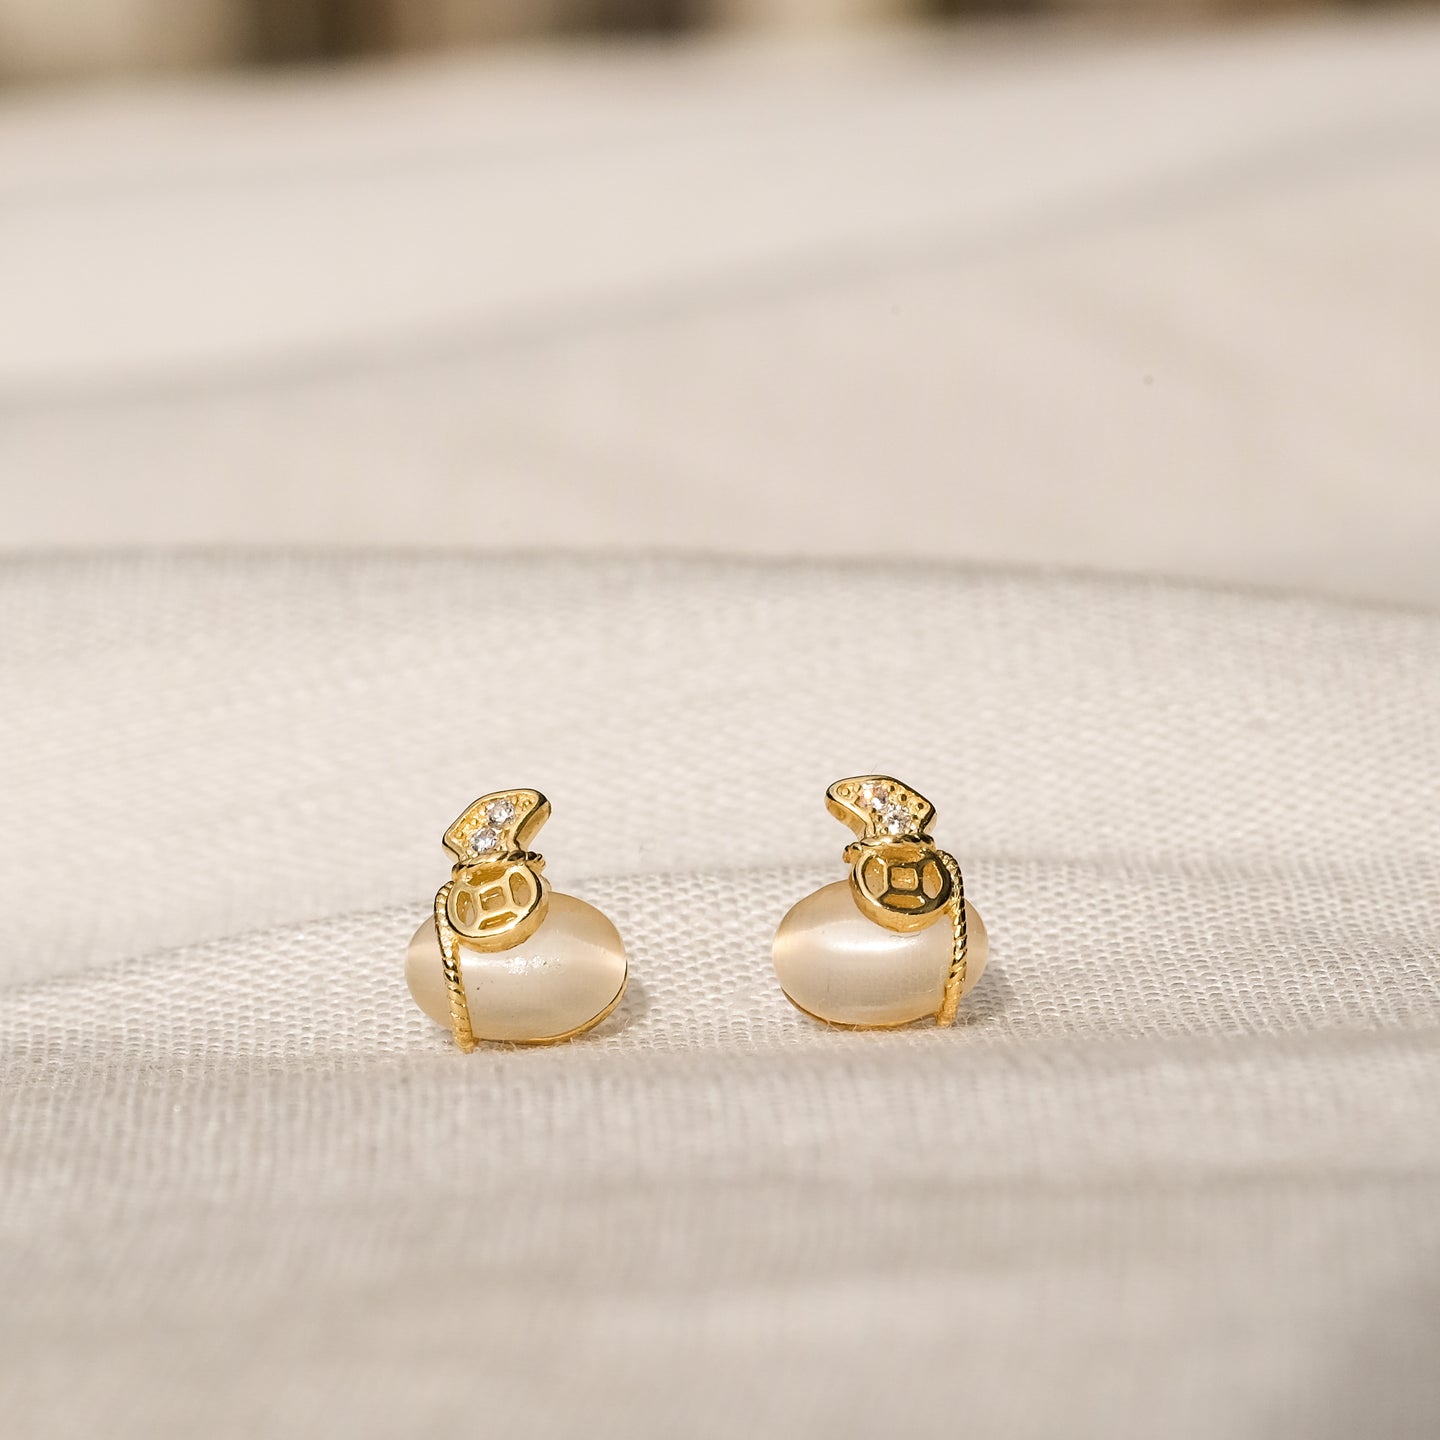 products/chato-cats-eye-earrings-18k-gold-vermeil-1.jpg